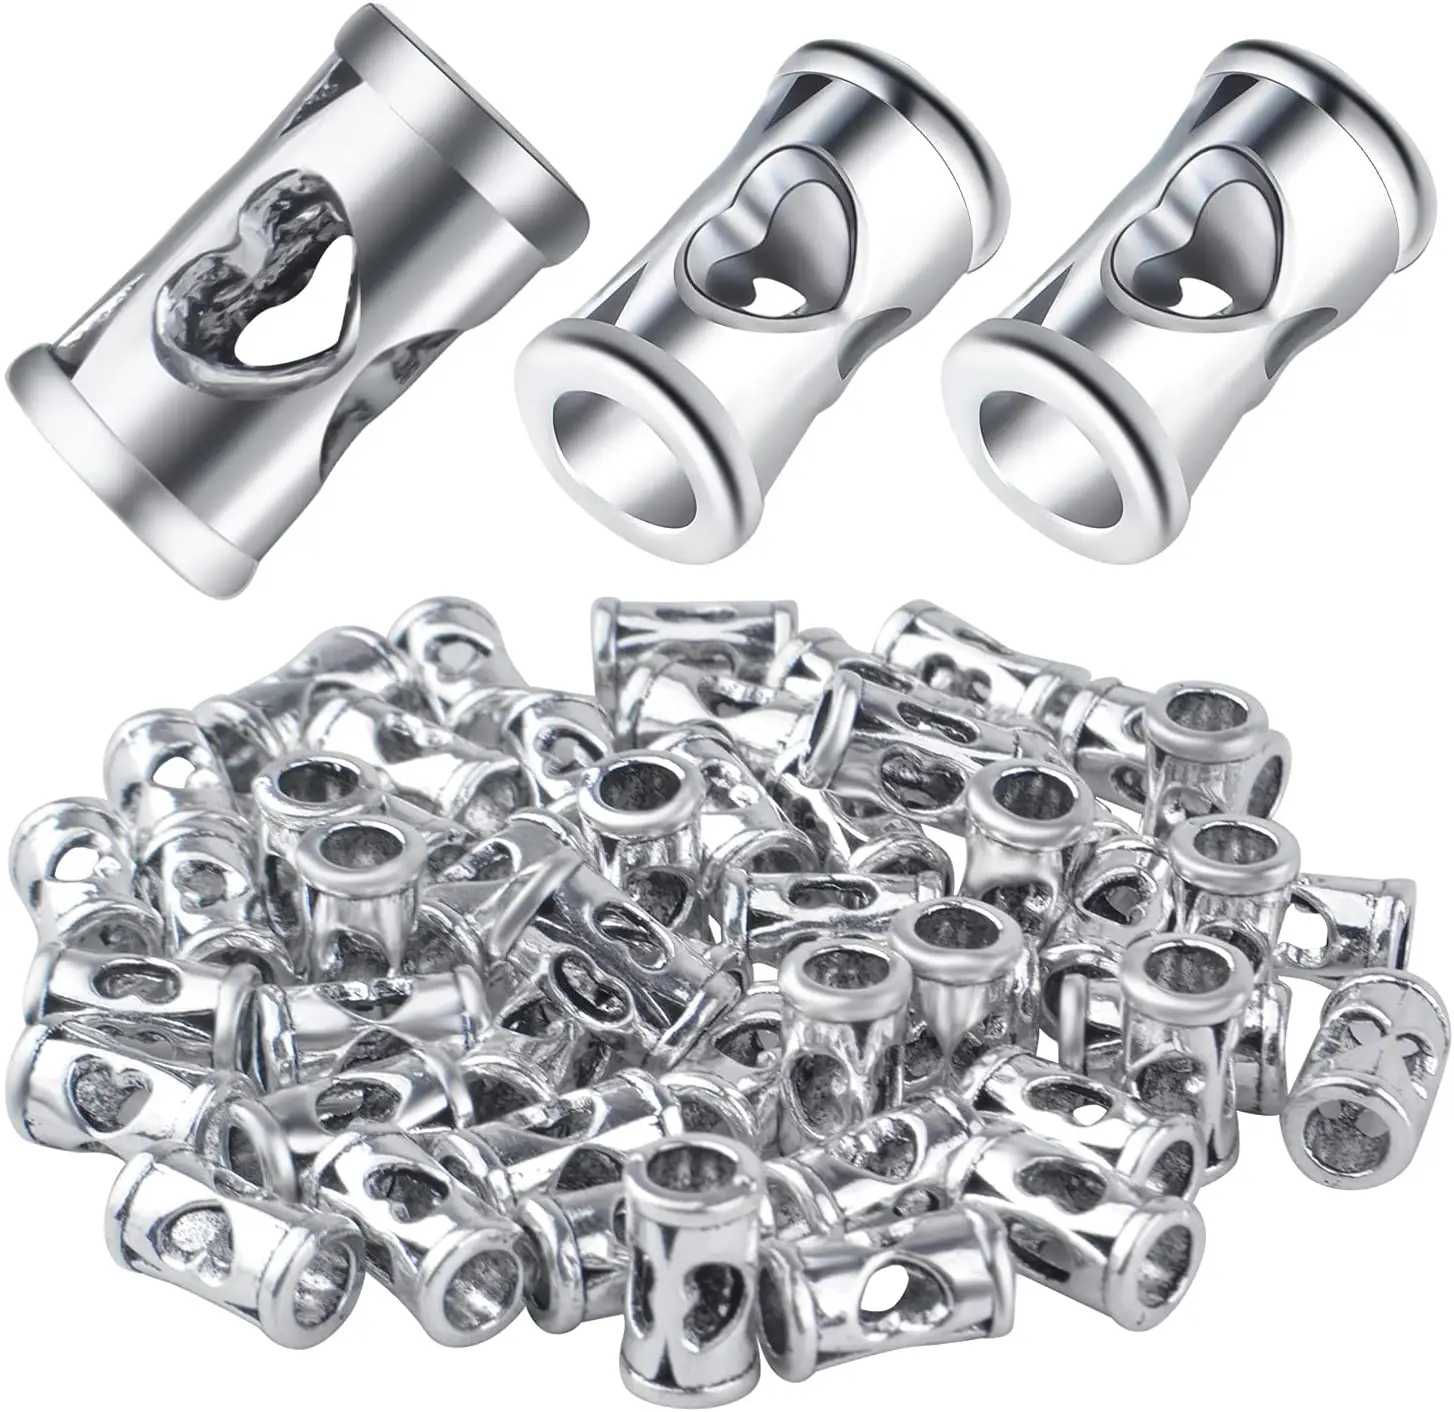 

50pcs Antique Silver Tube Spacer Beads Tibetan Alloy Column Loose Beads for DIY Bracelet Necklace Jewelry Making Supplies